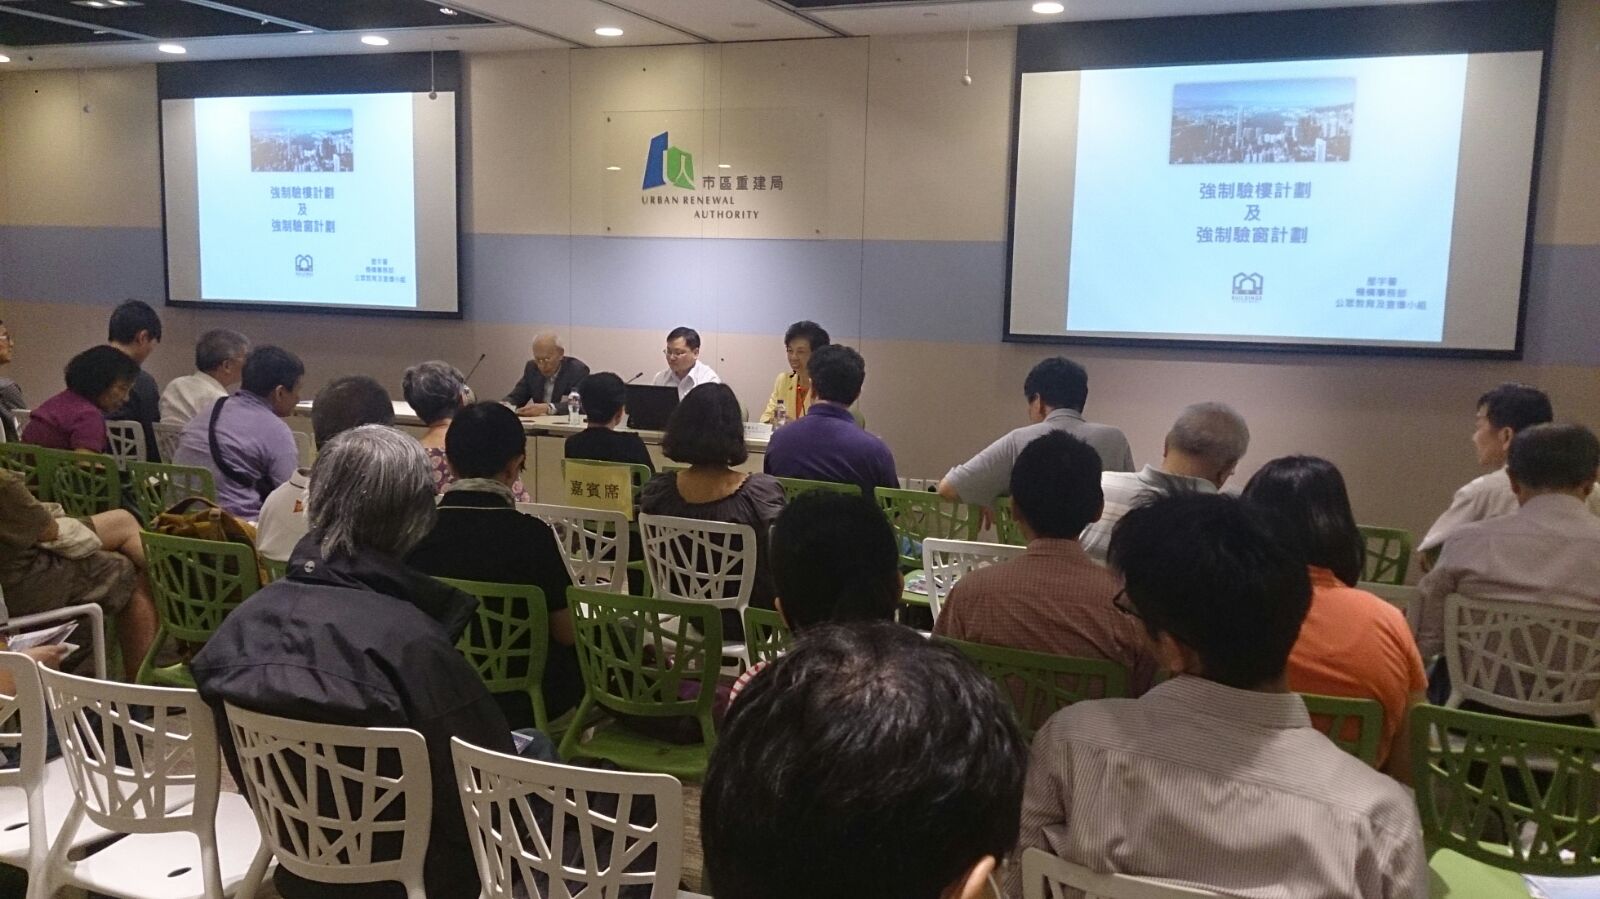 Yau Tsim Mong District Office Working Group on Concern over Building Manage